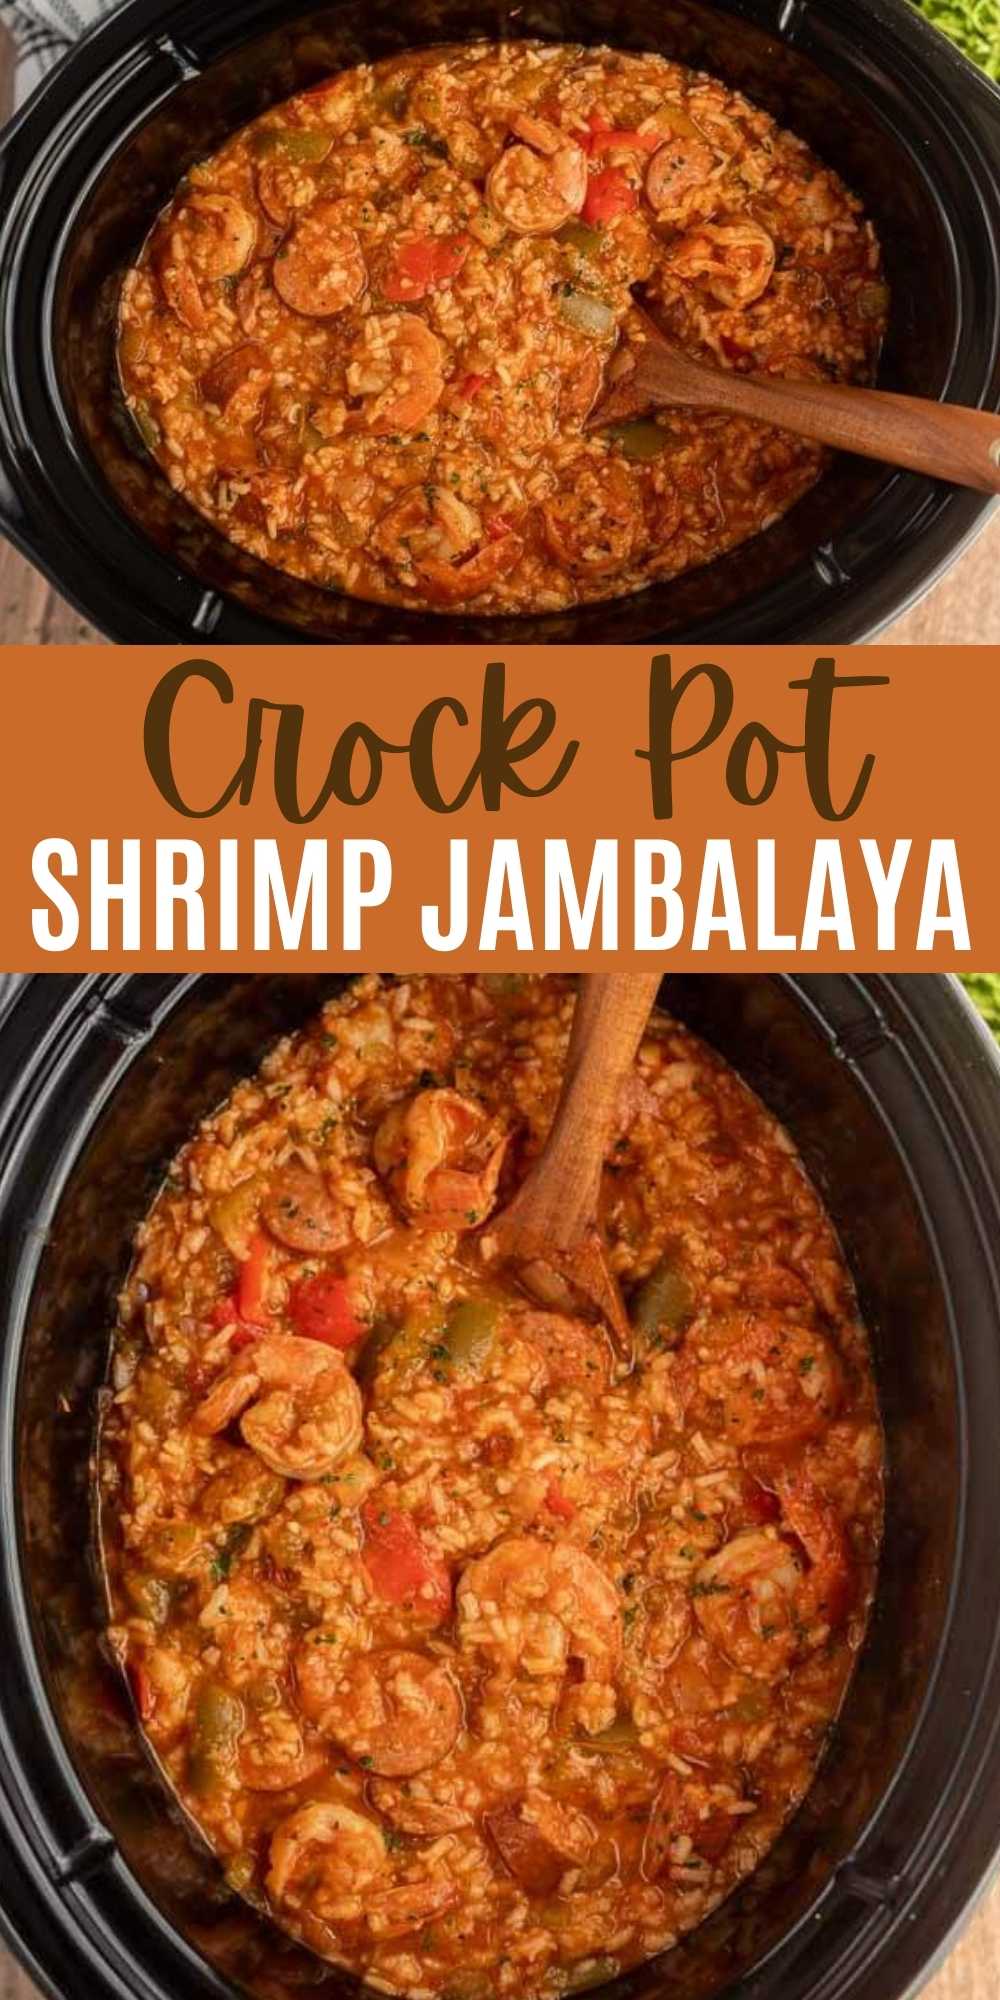 Slow Cooker Shrimp Jambalaya Recipe is a one pot meal that is flavorful in each bite. With lots of shrimp and sausage, this meal is sure to impress. The entire family will love this crock pot shrimp and sausage jambalaya recipe. #eatingonadime #crockpotrecipe #slowcookerrecipe #seafoodrecipes #cajunrecipes 